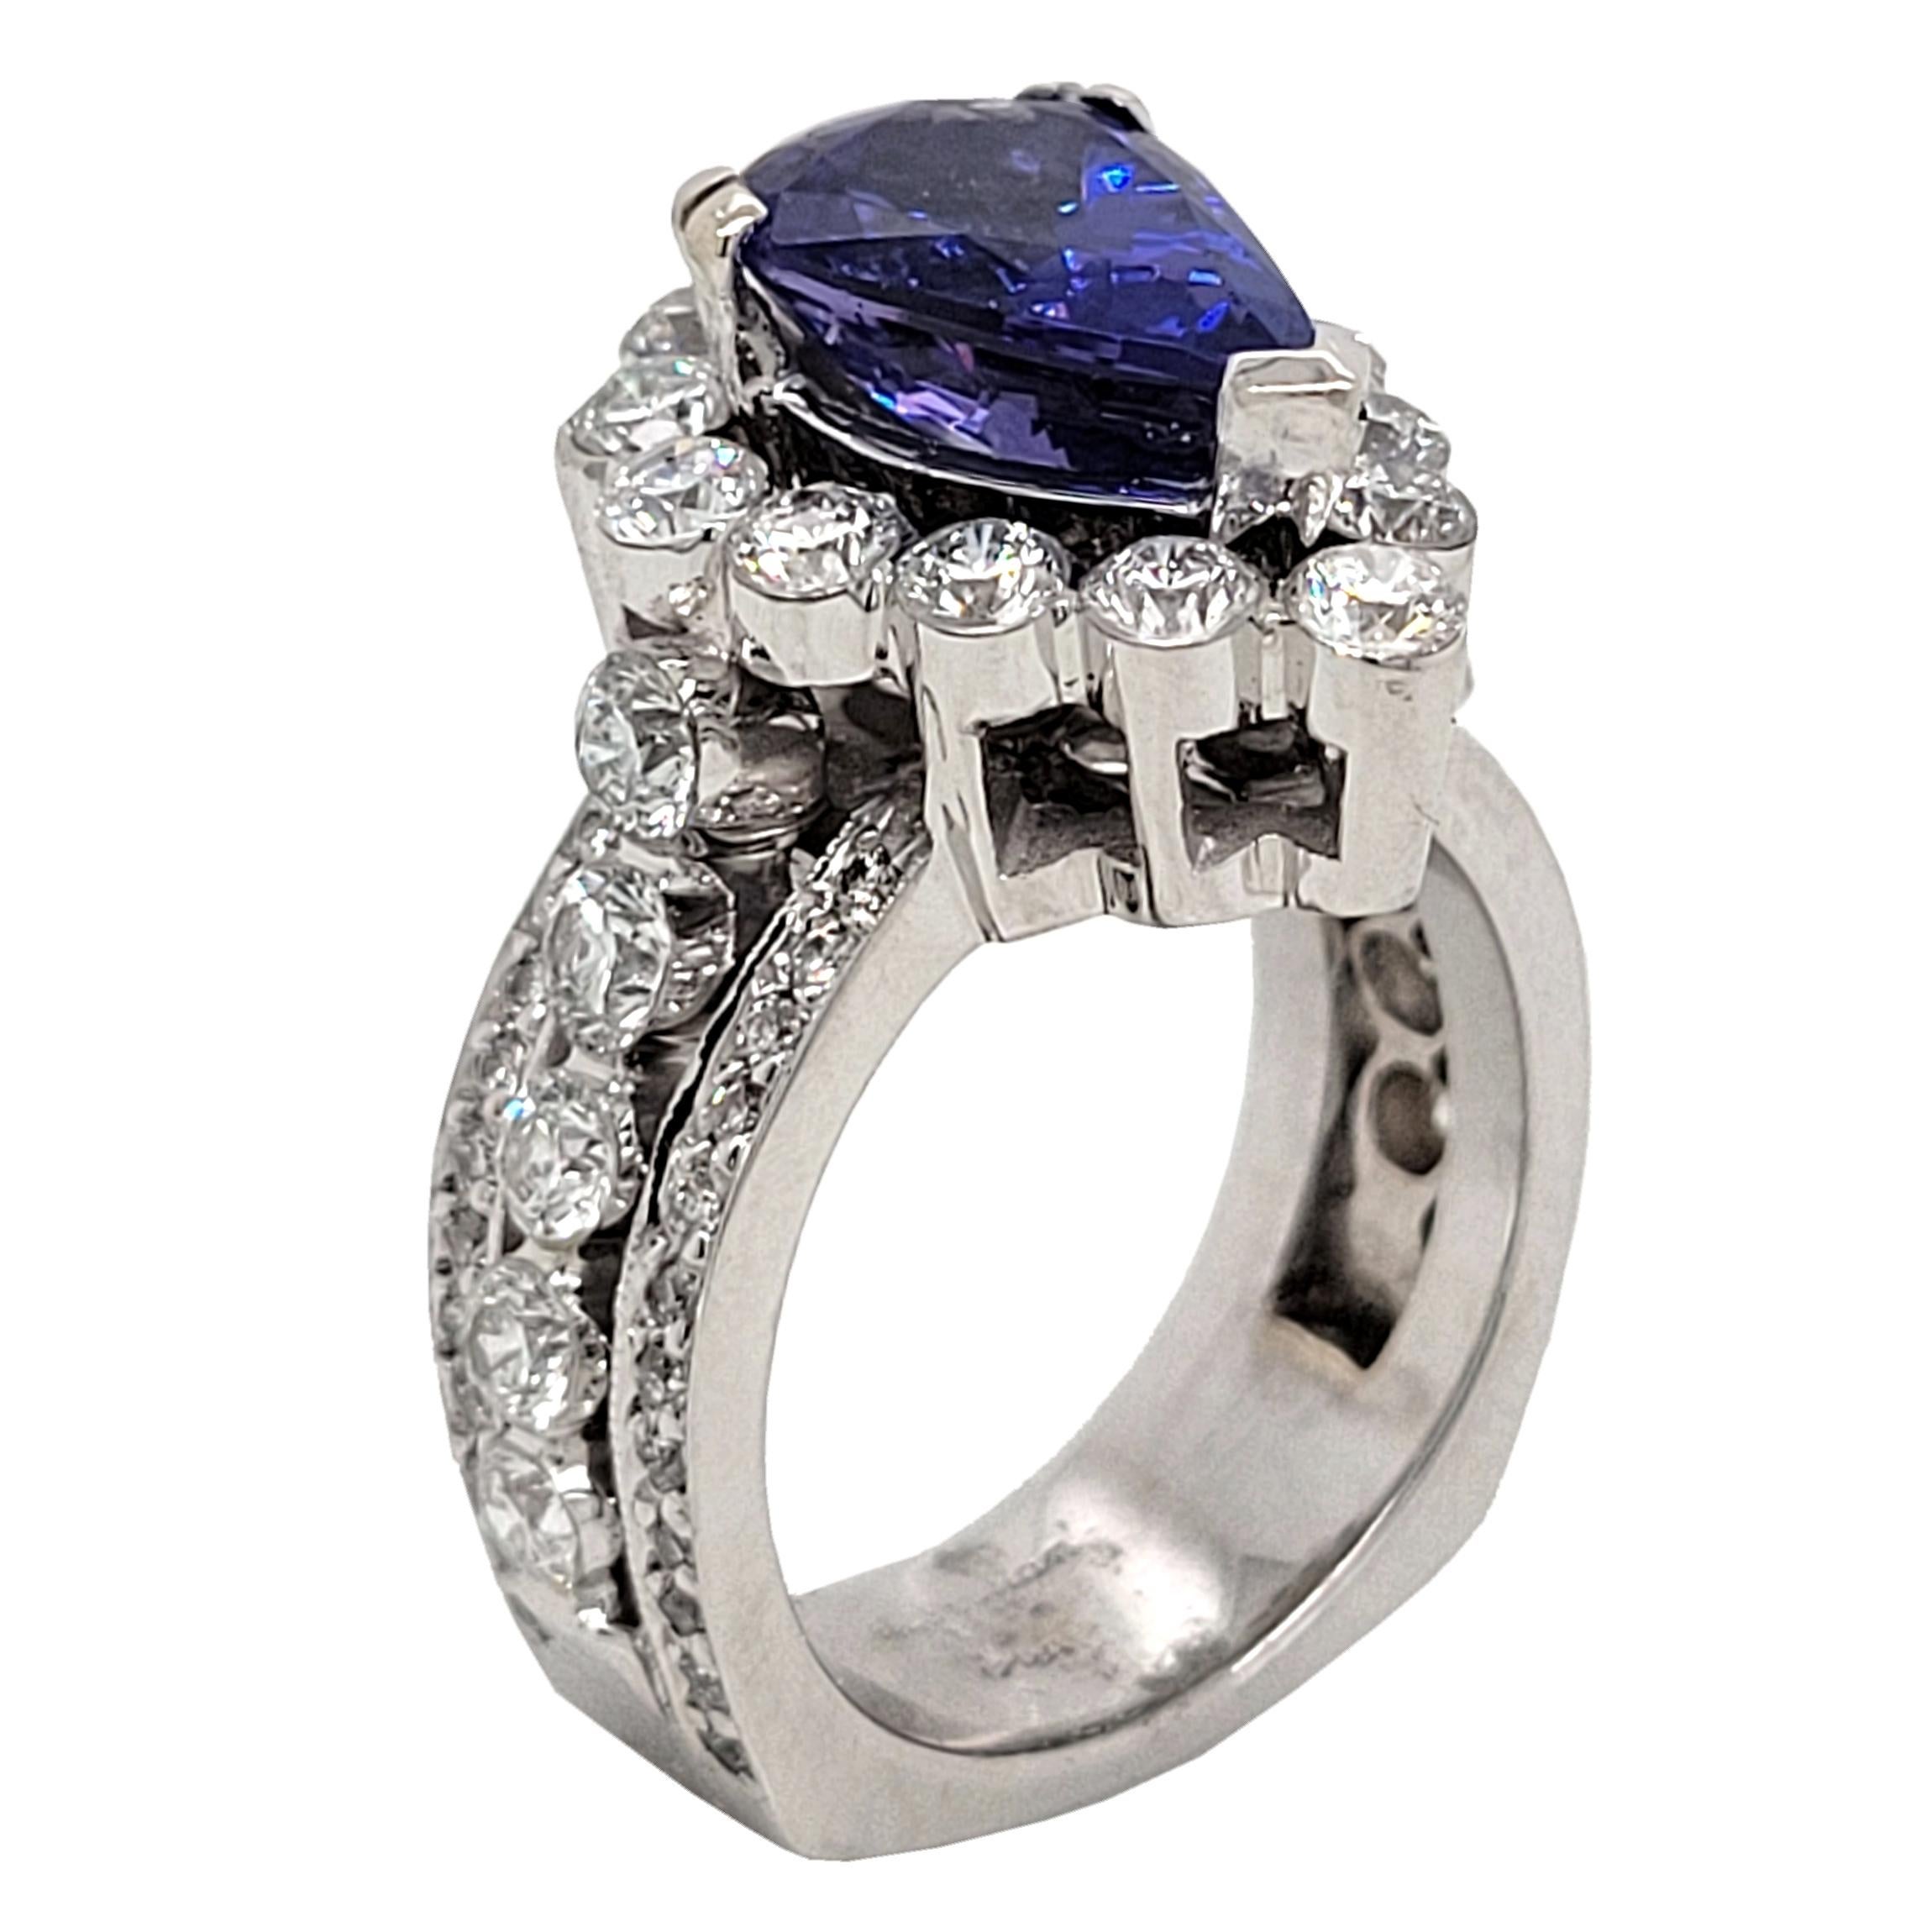 A  Beautiful Color 3.05 Ct Pear Shaped Tanzanite set in a gorgeous 18k gold  Pave/Invisible set engagement Ring with halo and total diamond weight of 2.45 Ct. on the side.  The ring has a squared Shank.

Center stone: 3.05 Ct Pear shape